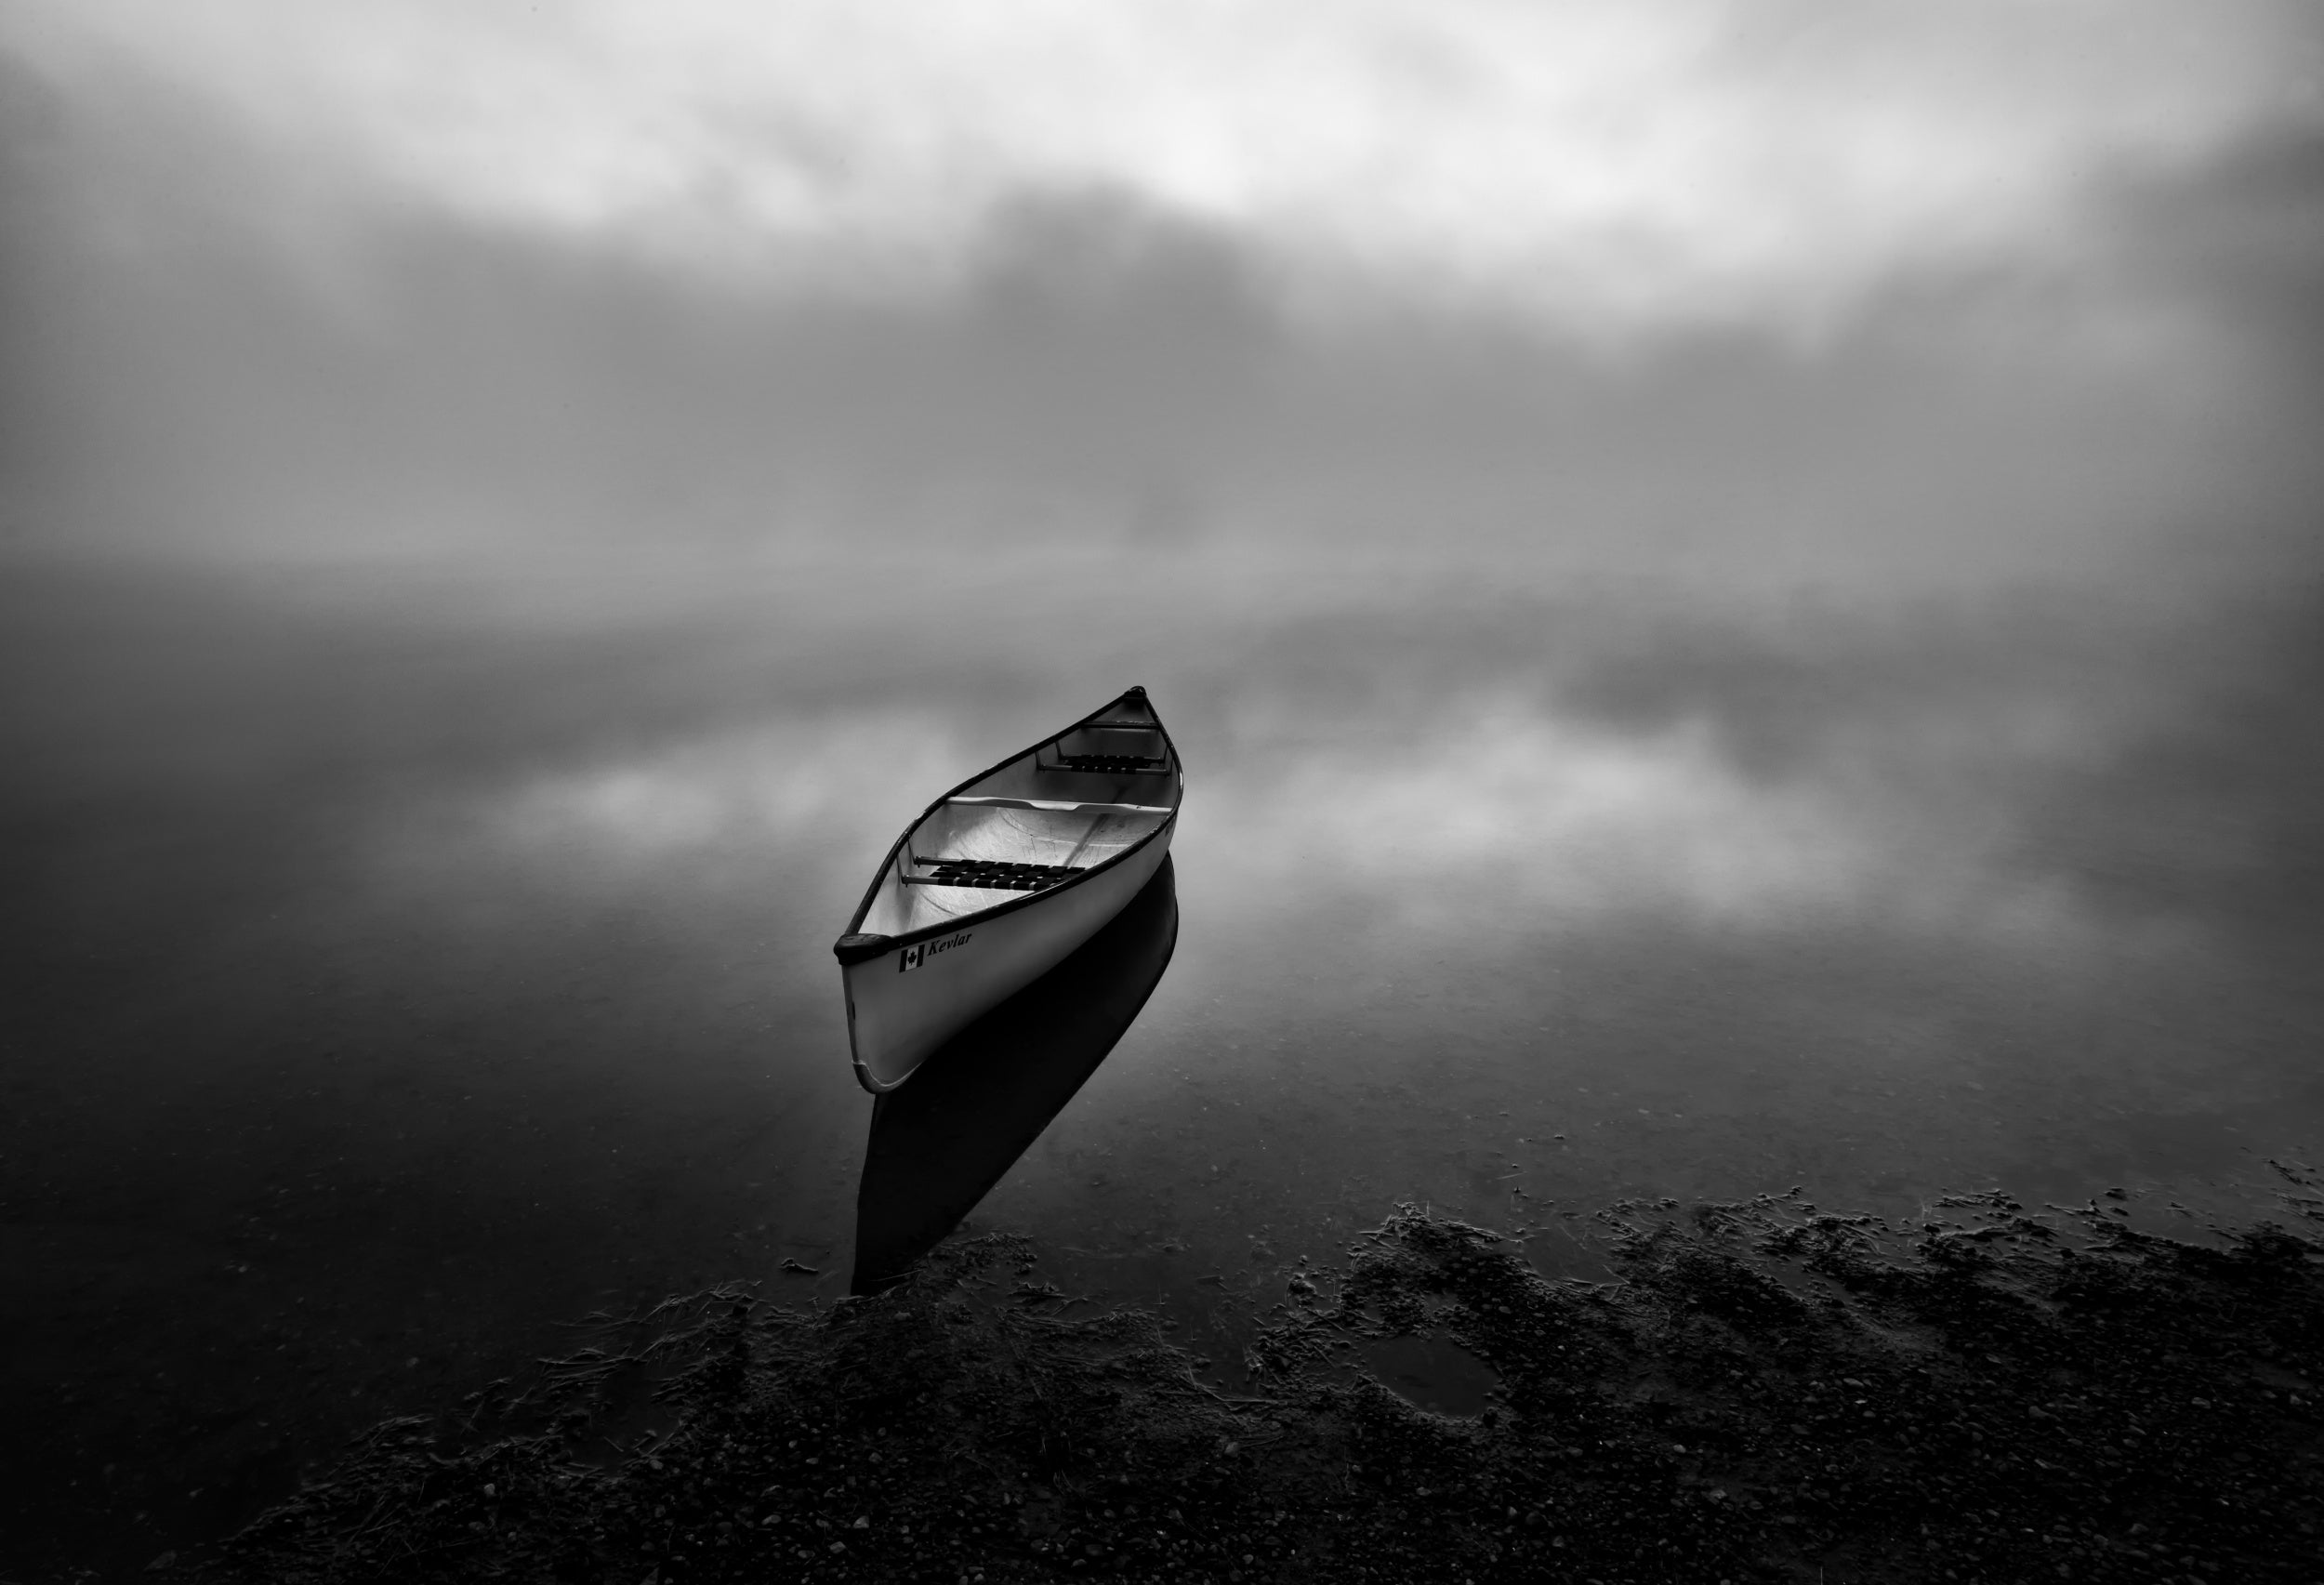 A lonely boat!